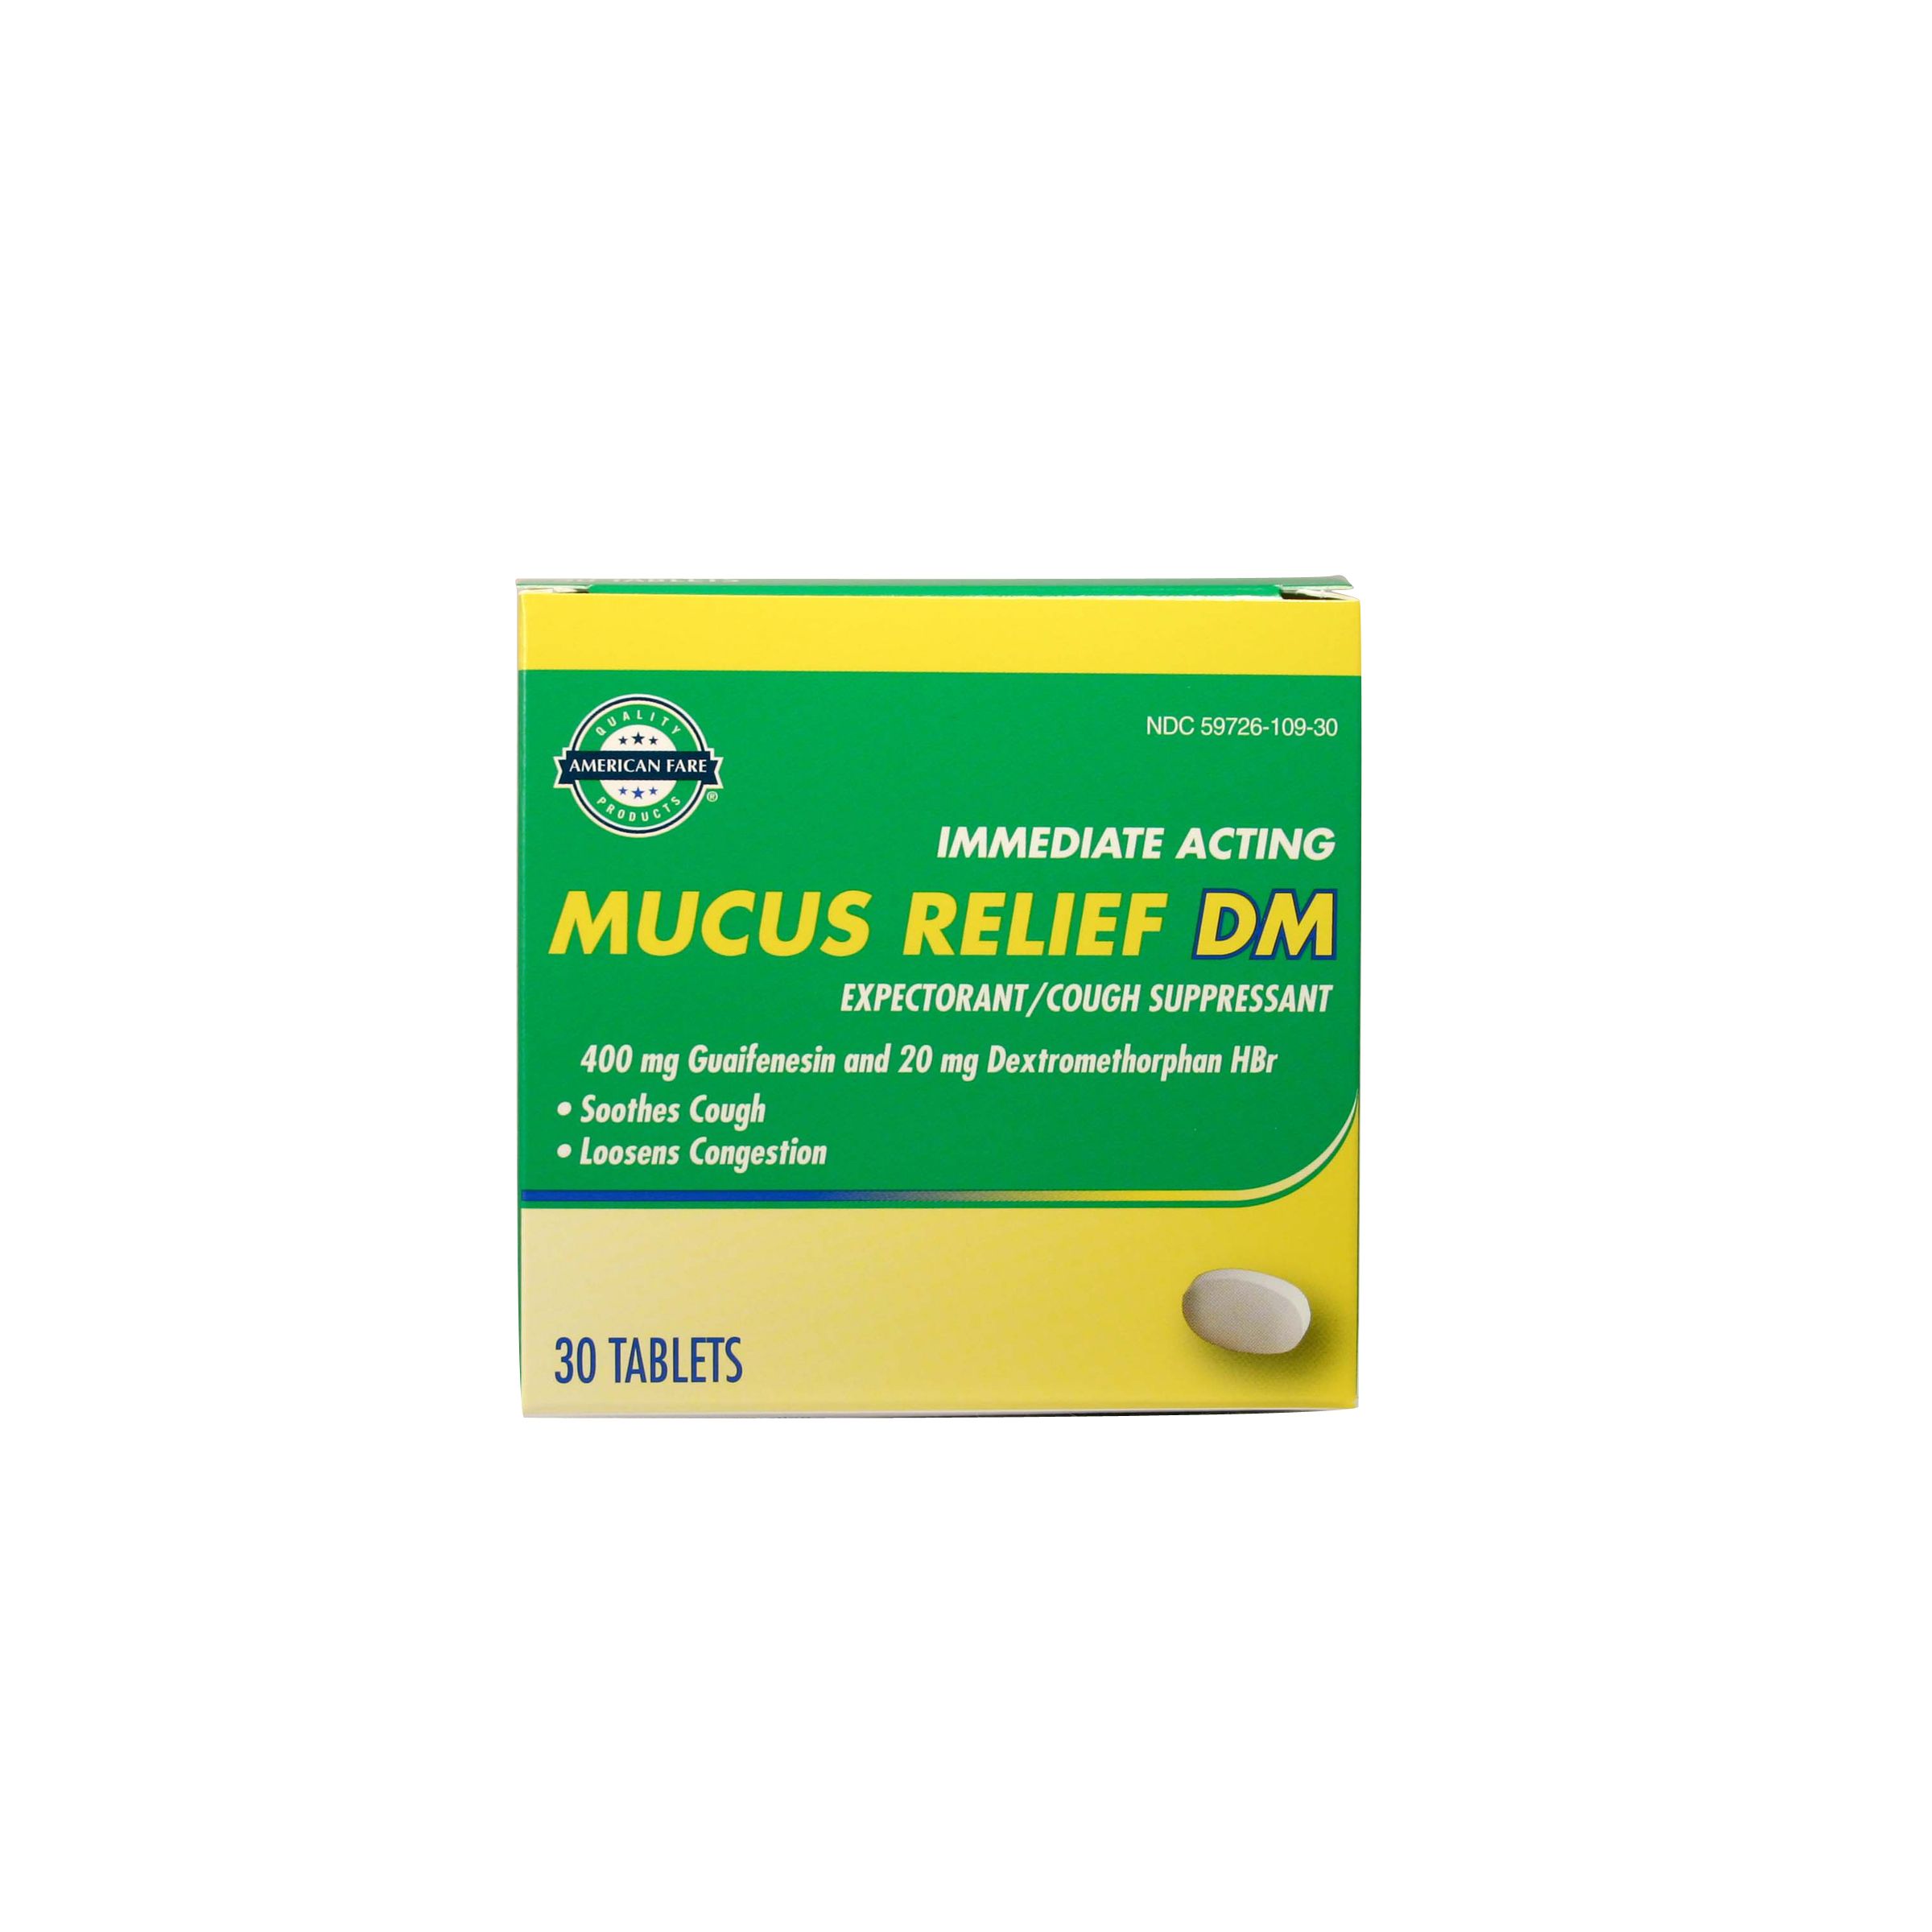 Mucus Relief Expectorant Cough Suppressant Tablets